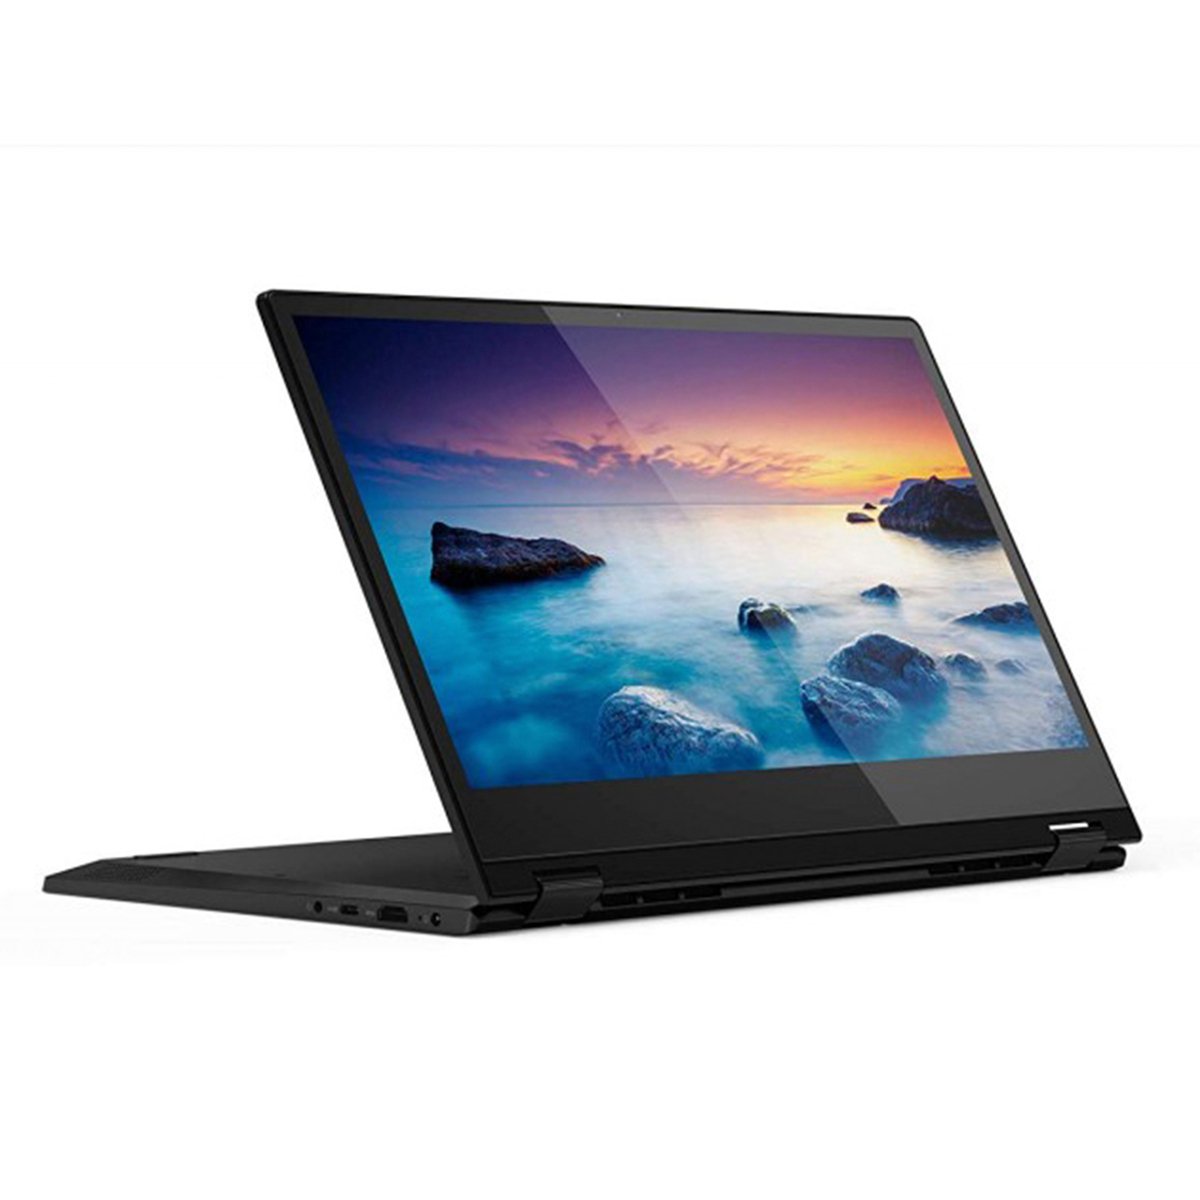 Lenovo ideapad C340-14IML Convertible Touch Laptop,Core i5 1.6GHz,8GB,256GBSSD,NVIDIA GeForce MX2302GB,Windows 10,Abyss Blue